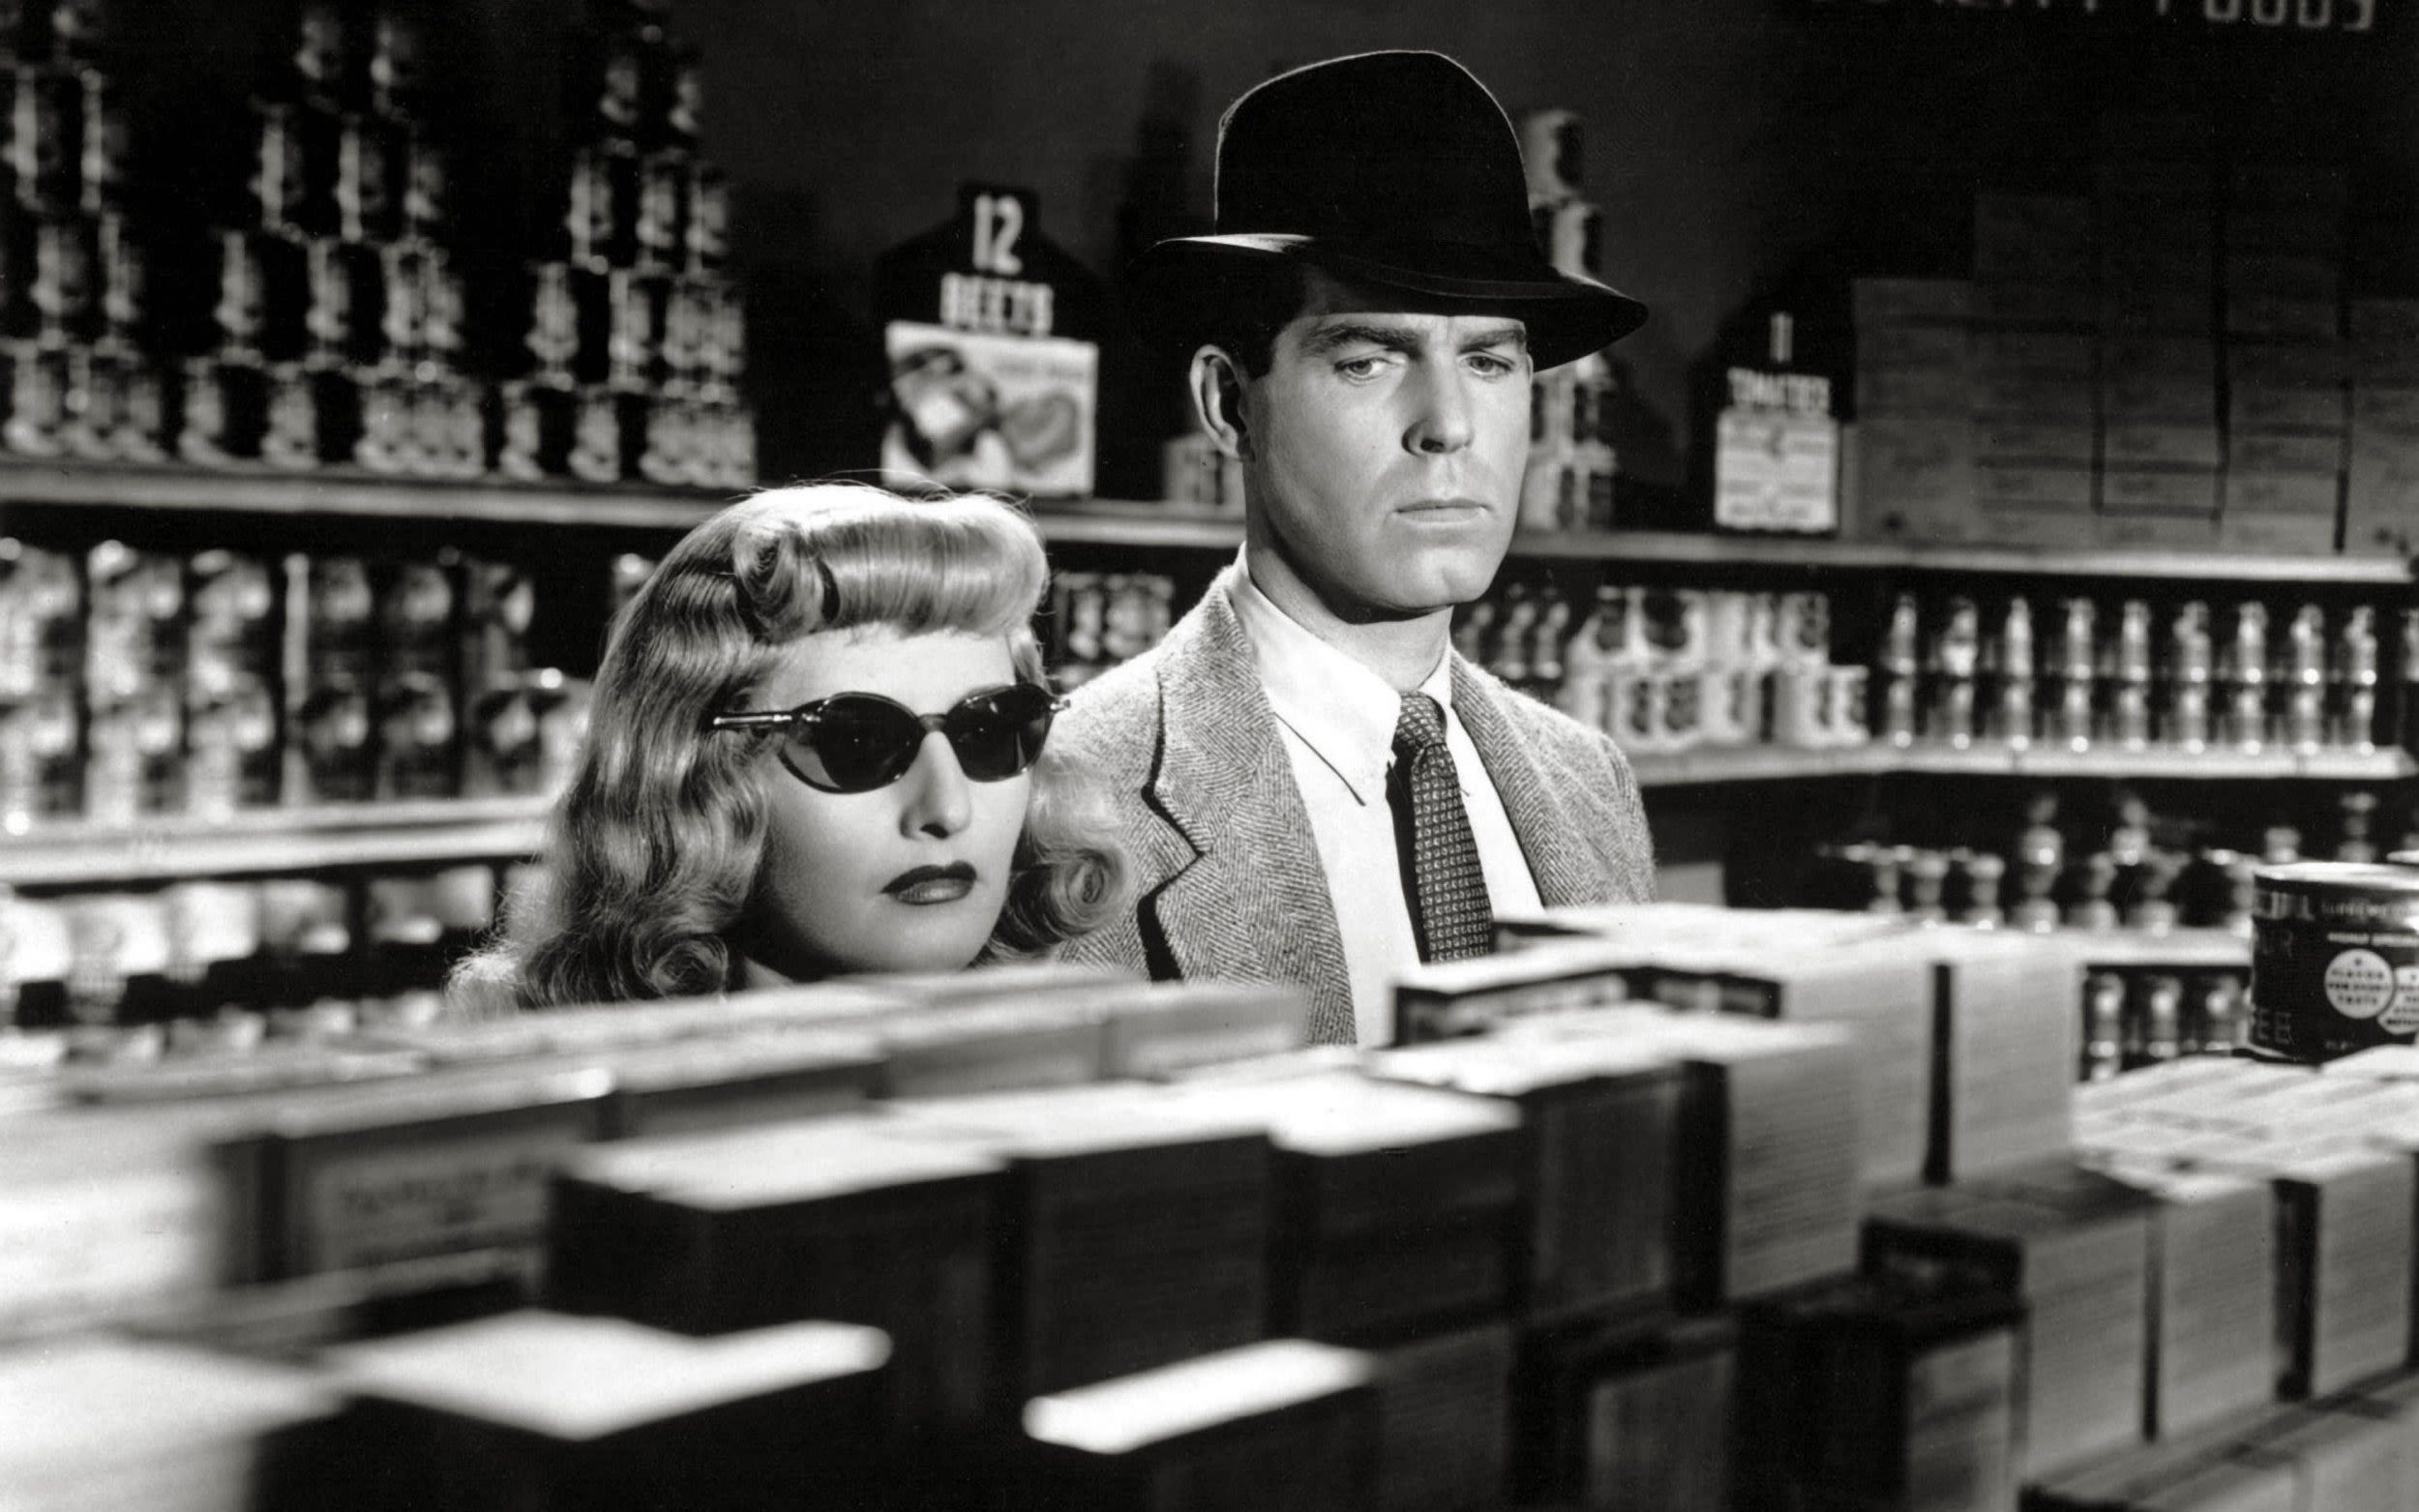 Barbara Stanwyck, an obscene typo and the sordid story behind Double Indemnity